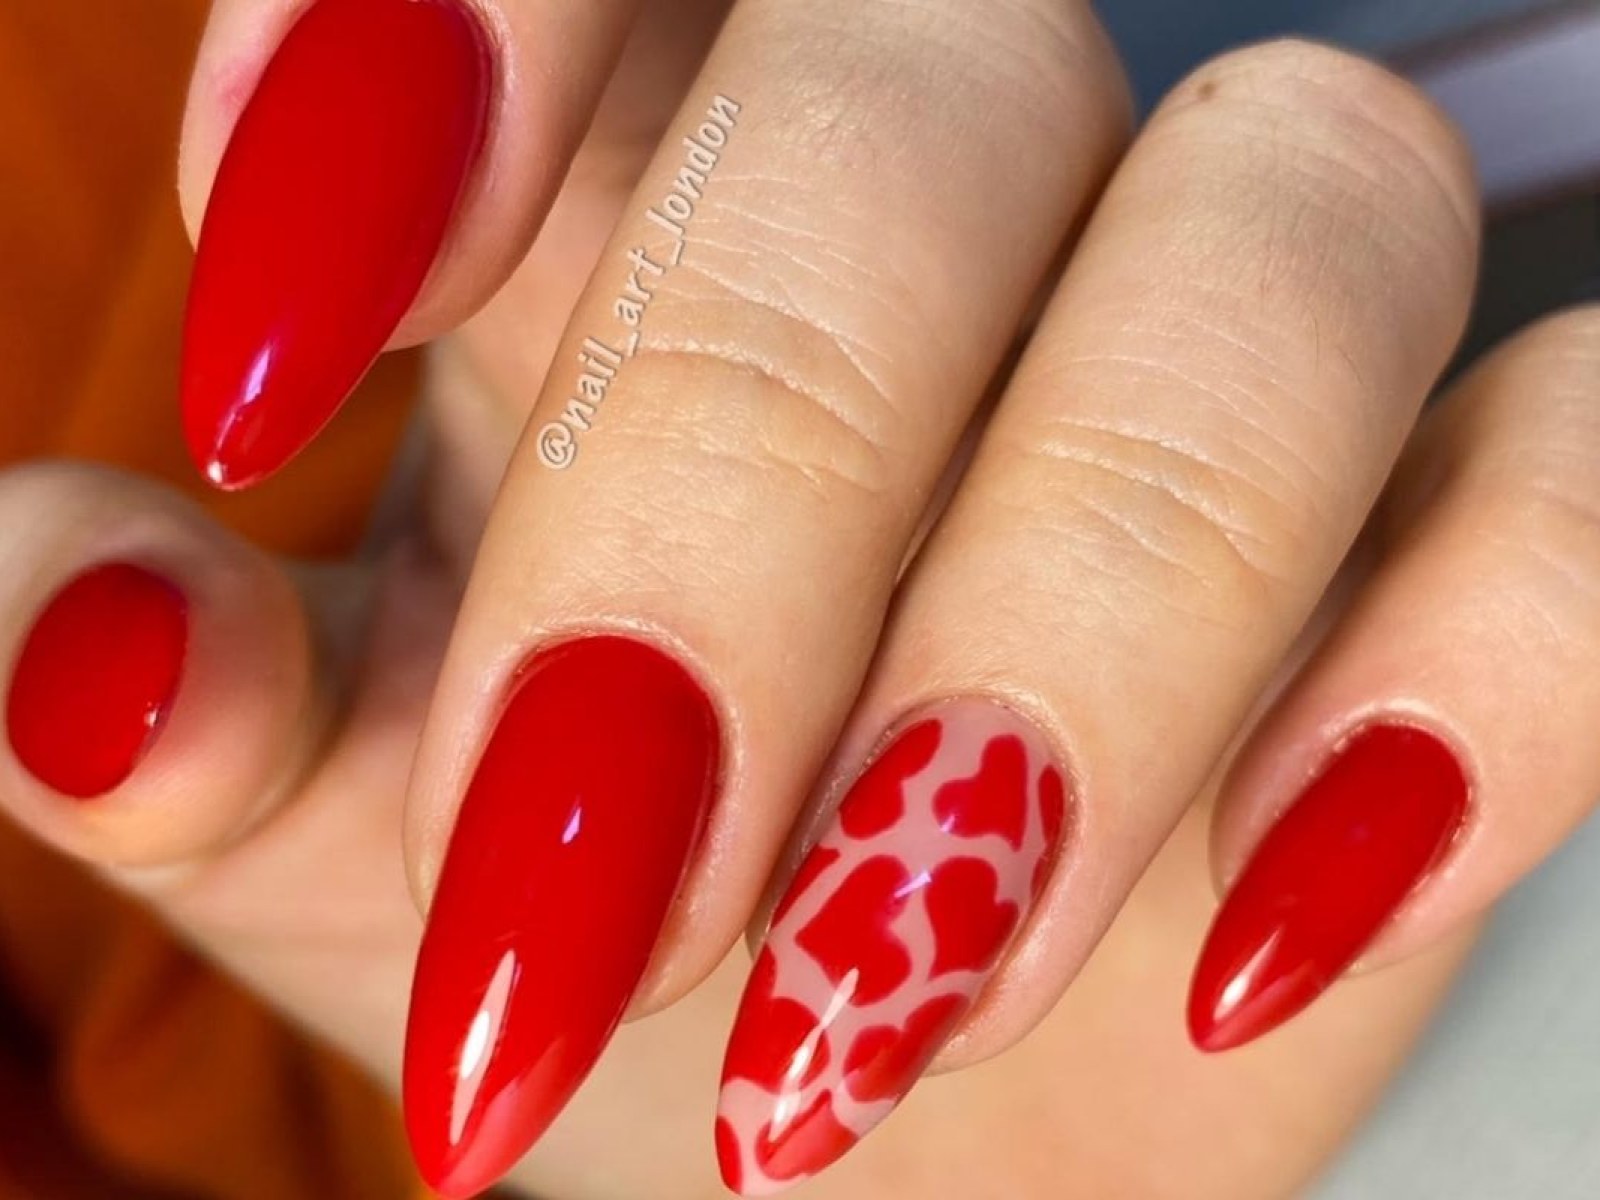 1. Red and White Polka Dot Nail Art - wide 6